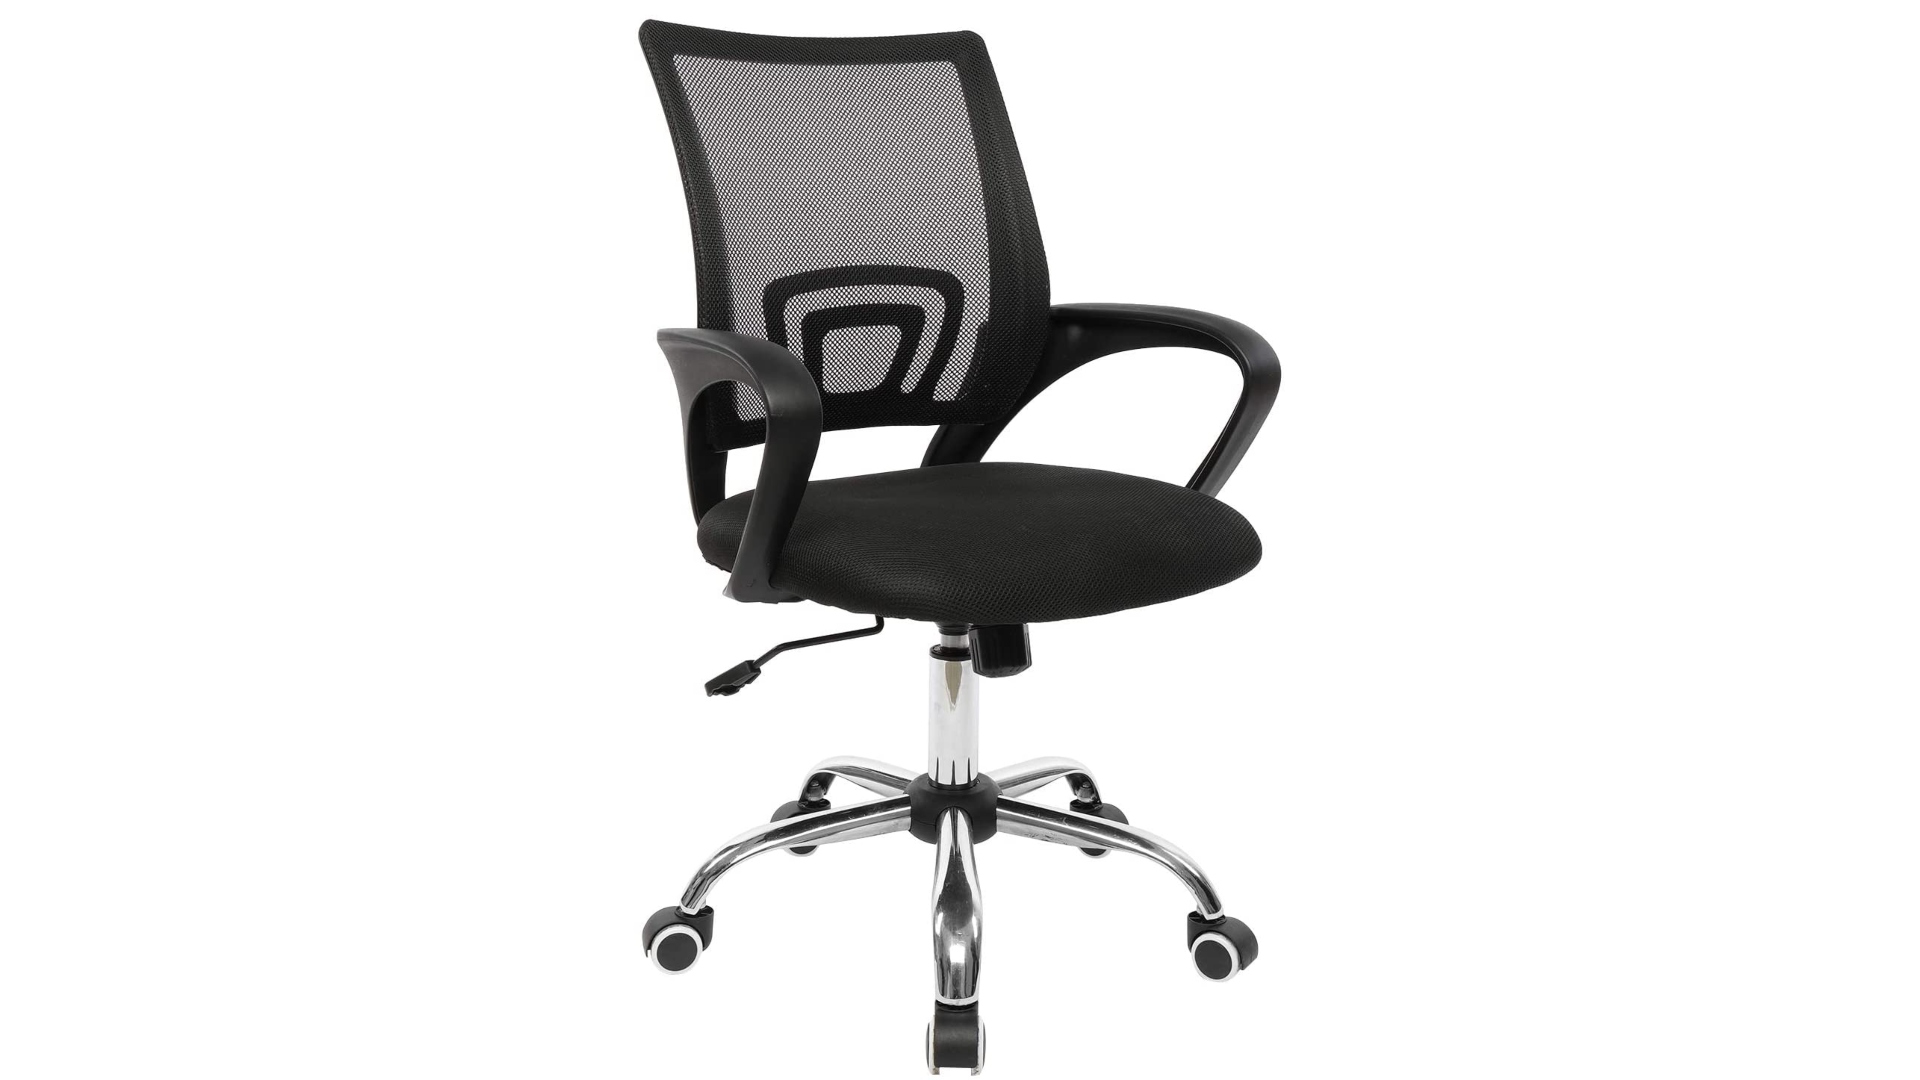 Best Amazon gaming chairs: Vingli home office chair.